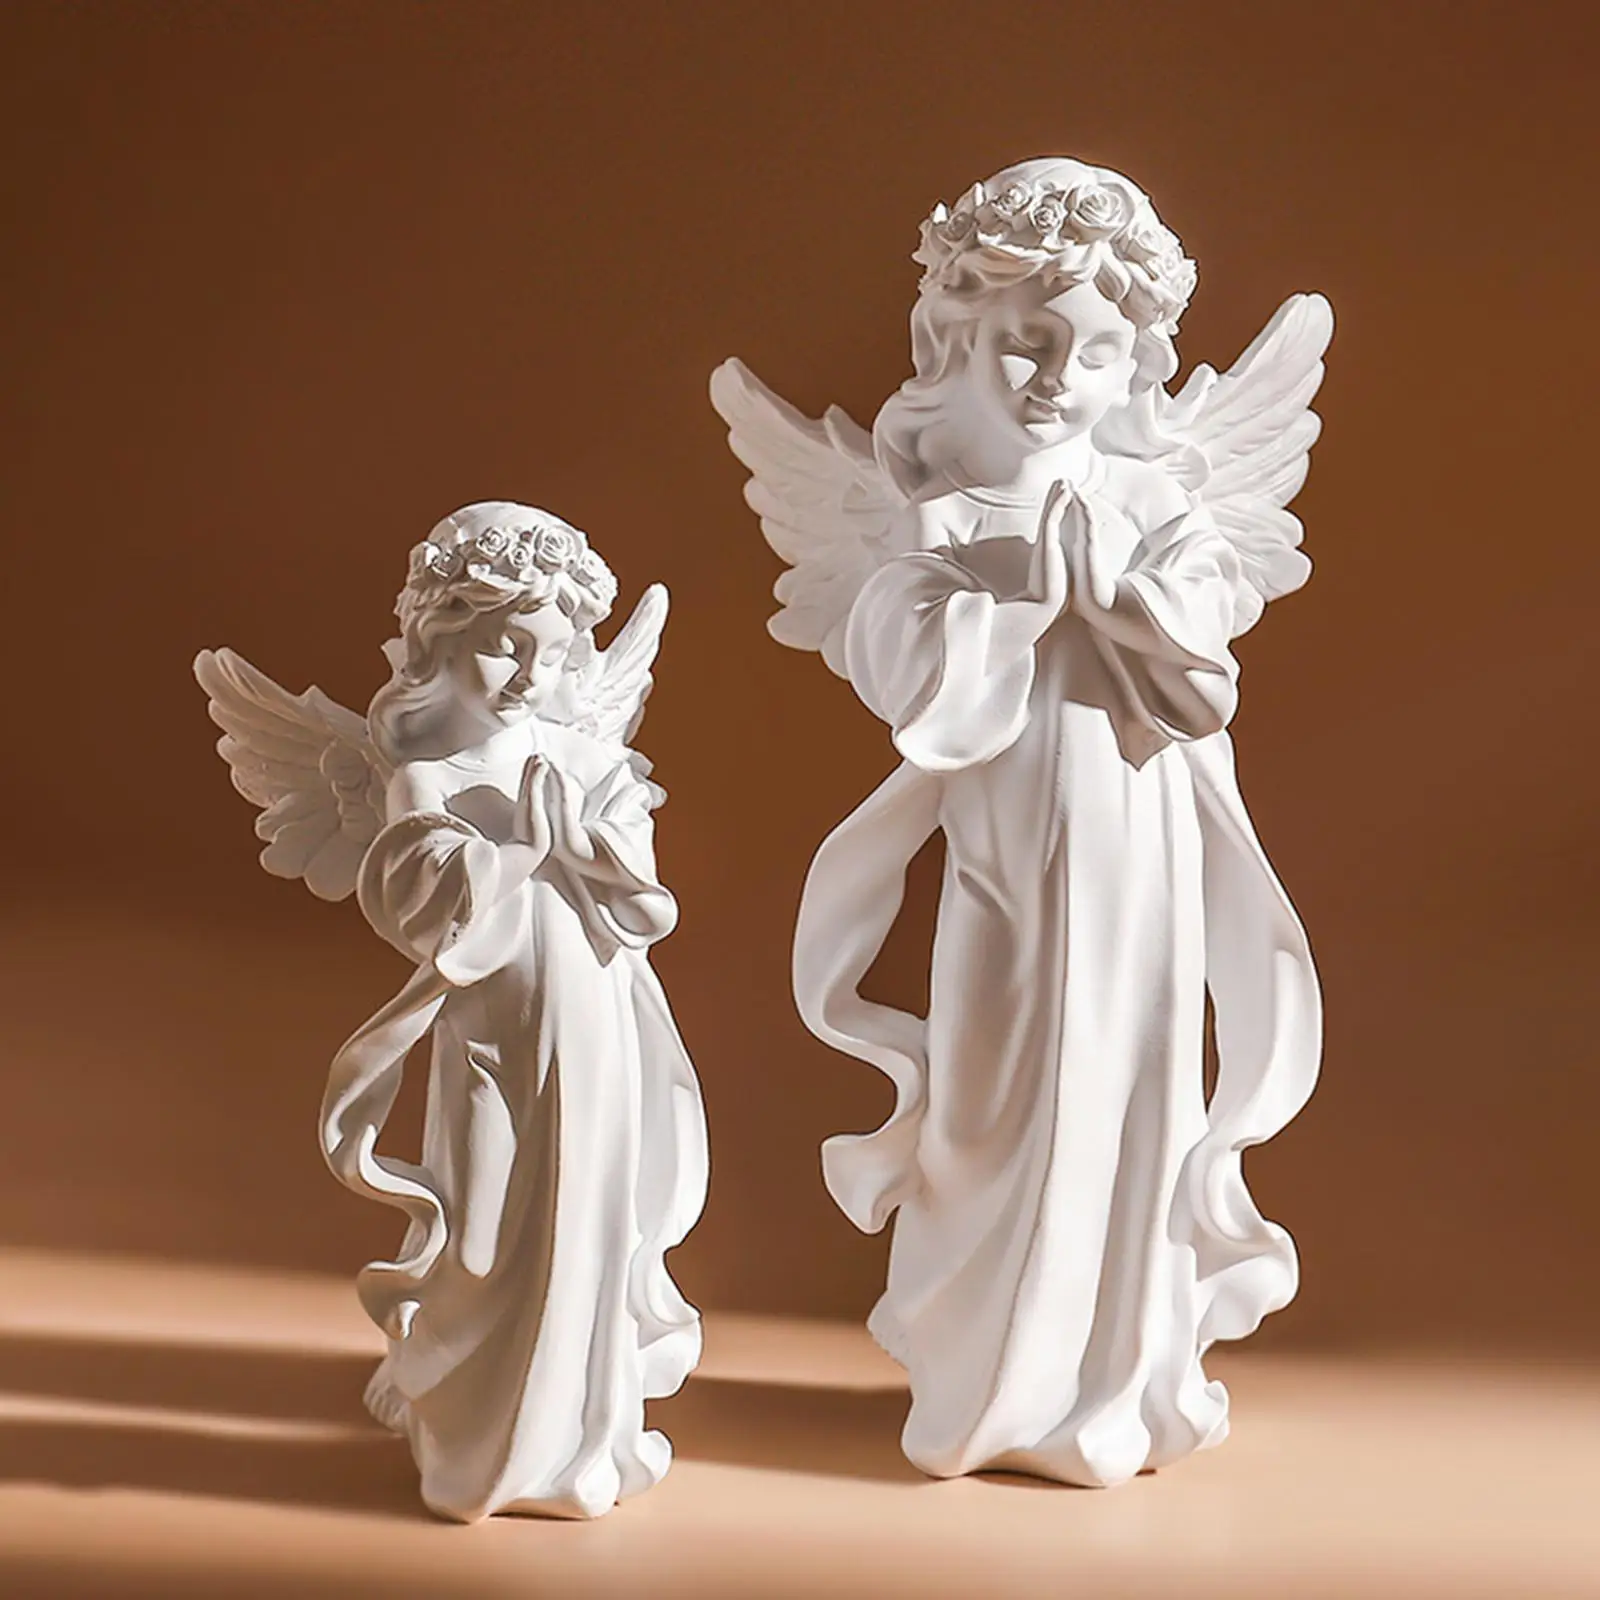 

Resin Praying Angel Figurine Statue Peaceful Prayer Sculpture Fairy Prayer Angel Sculpture Desktop Ornament Curving Crafts Gifts